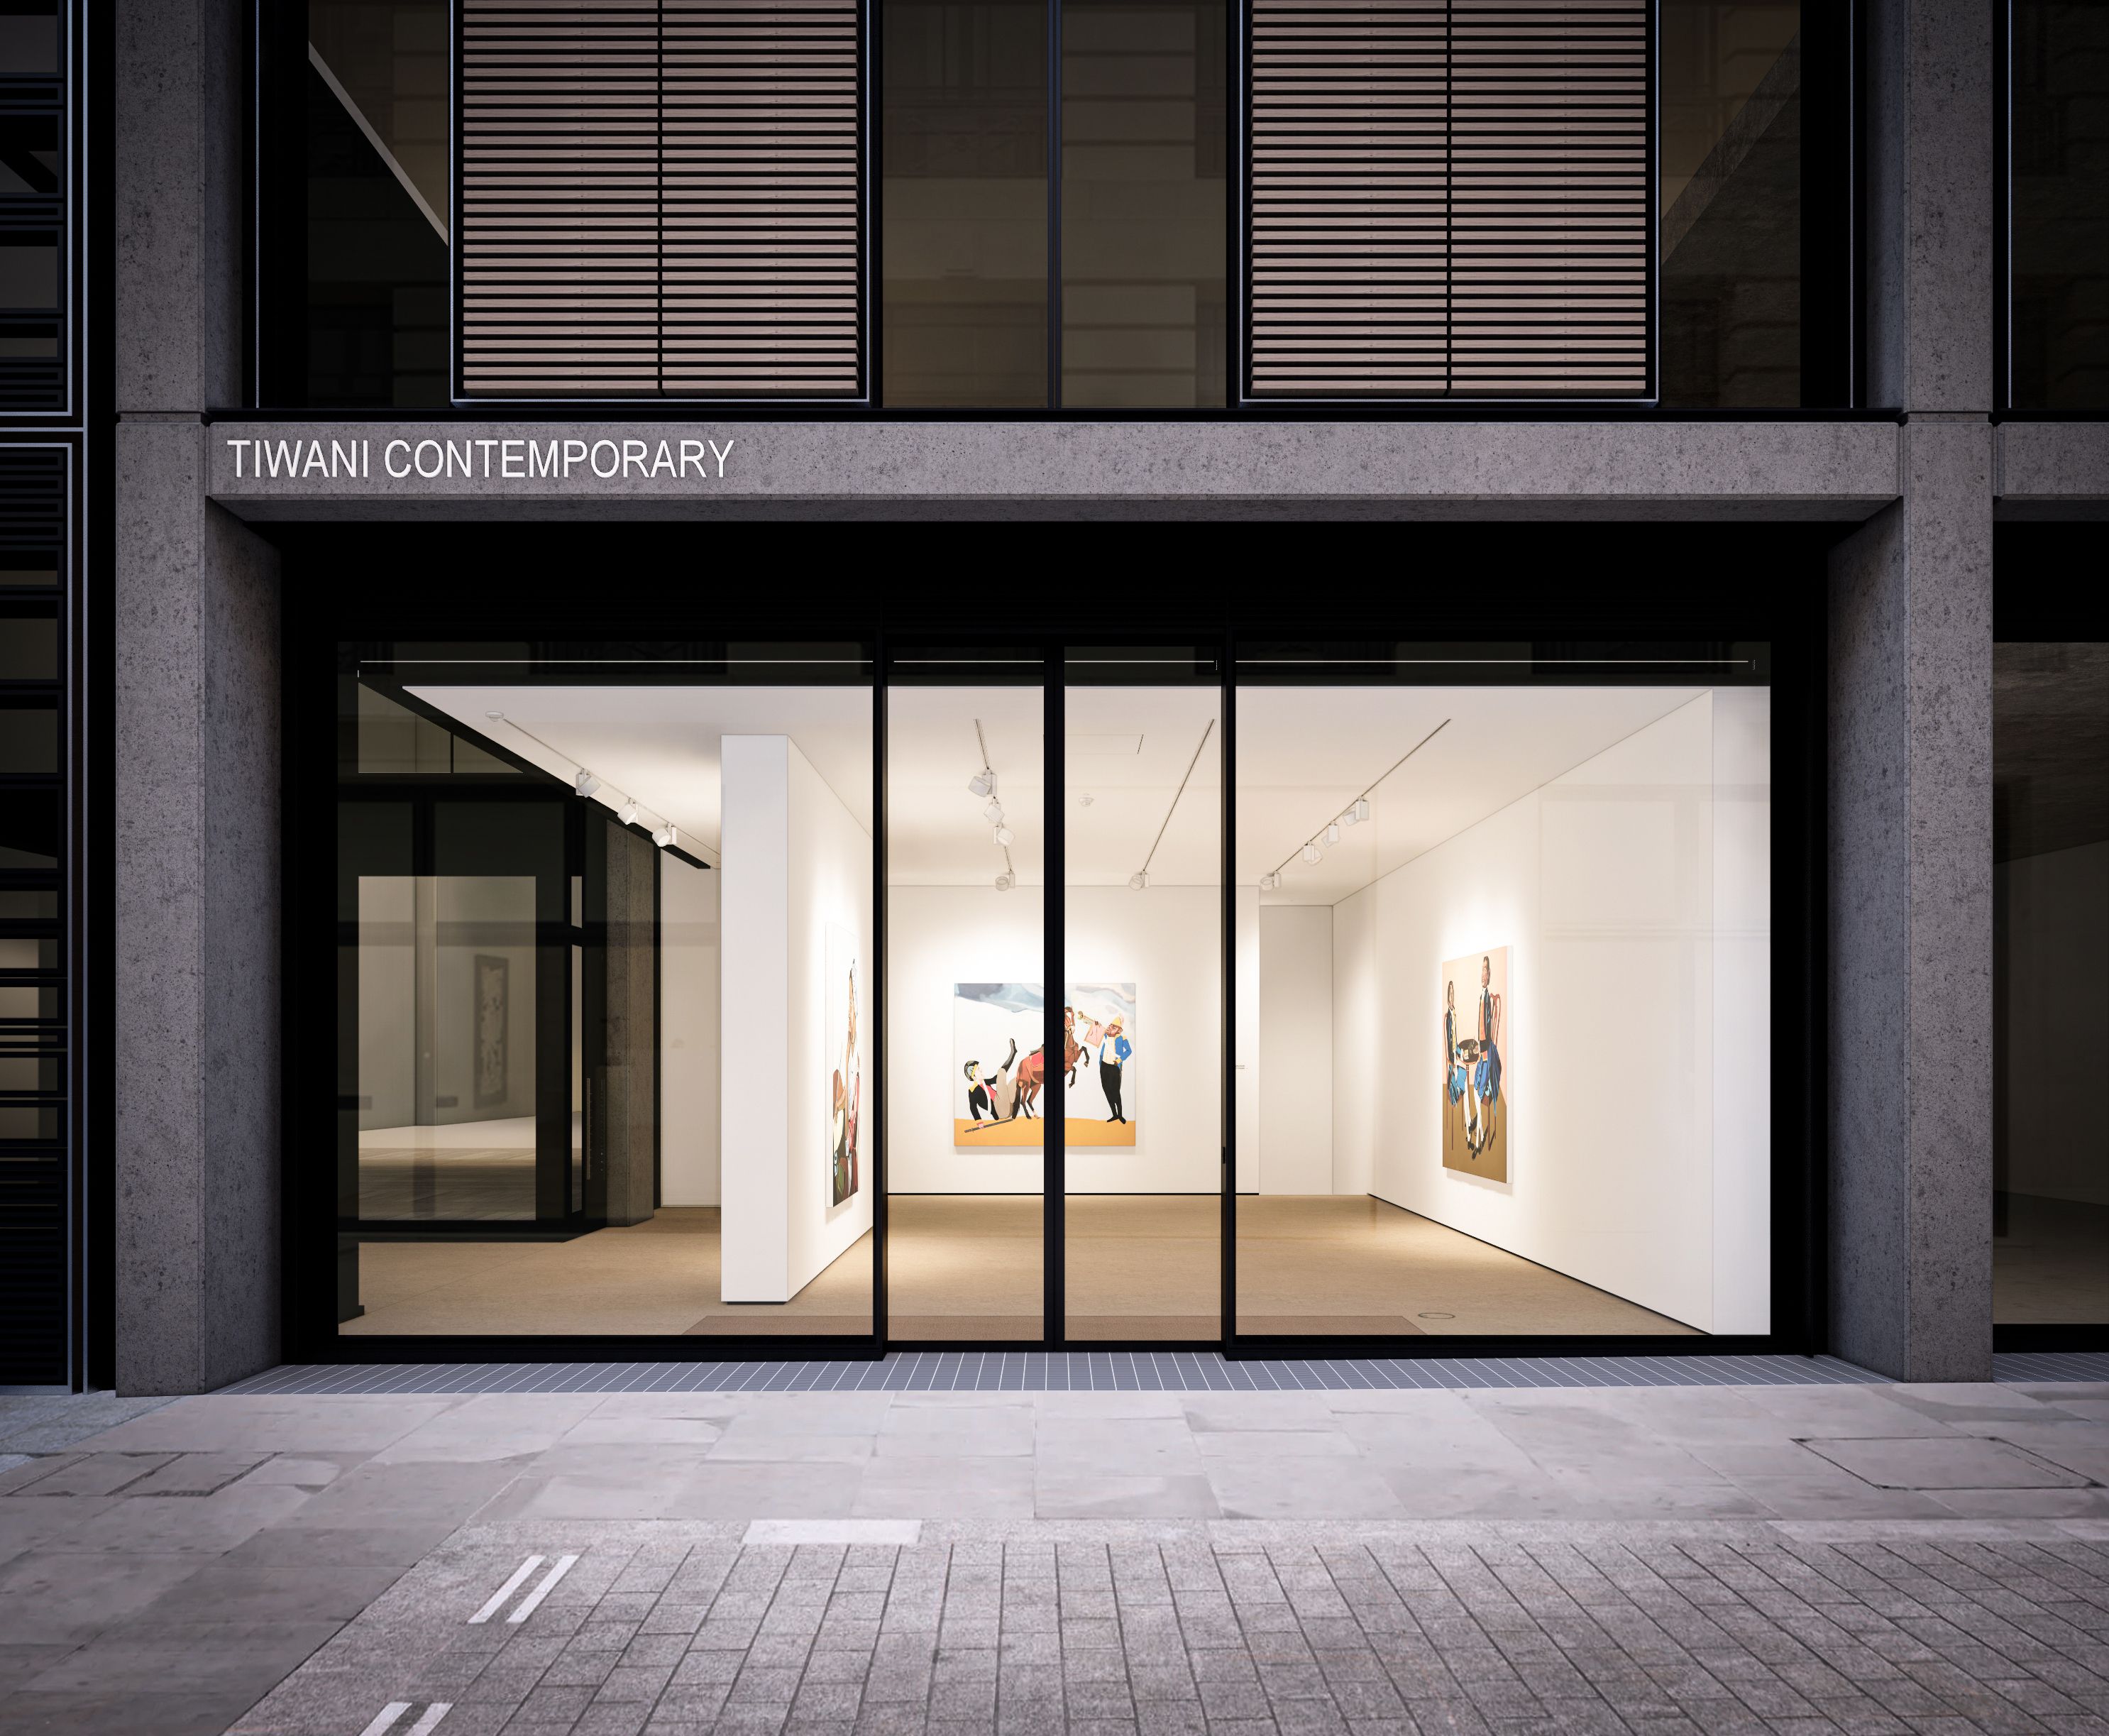 Tiwani Contemporary signs up for last remaining space on London's